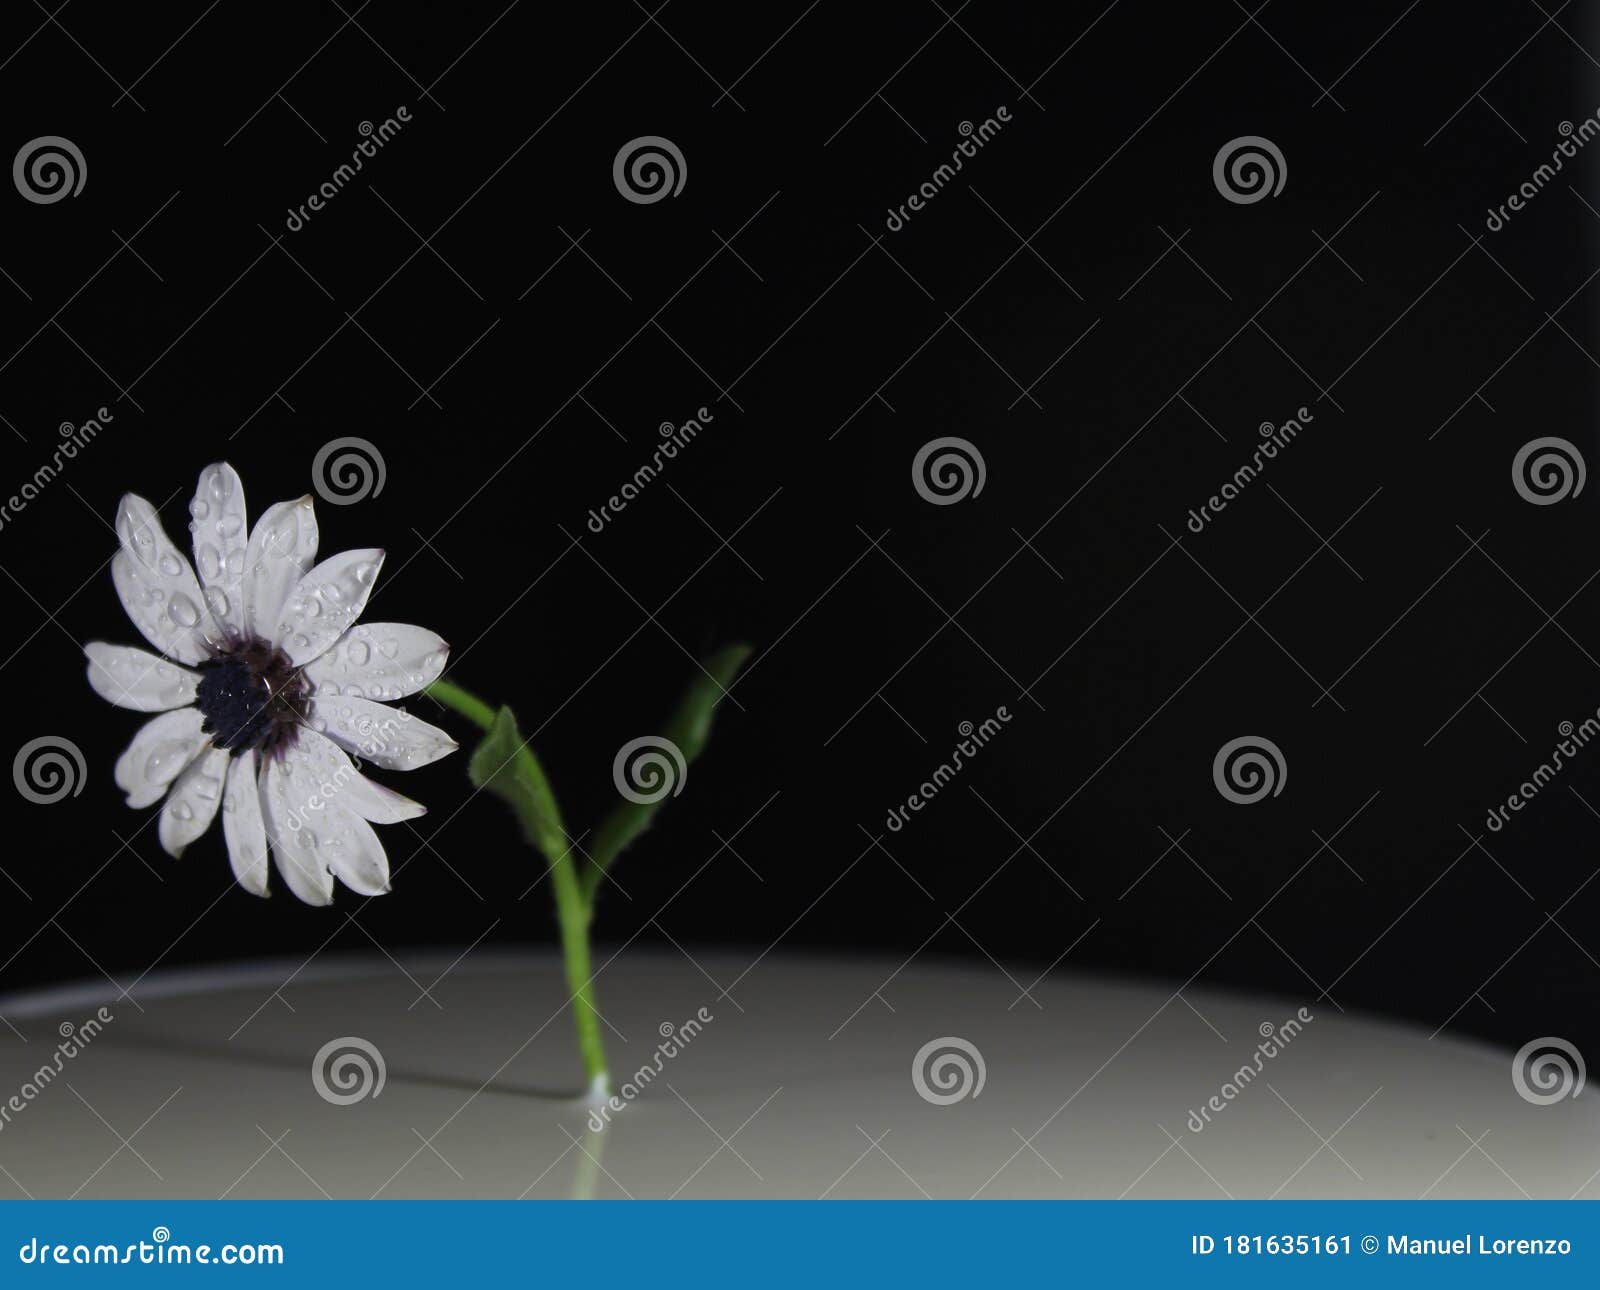 flower daisy plant natural beautiful blue aroma